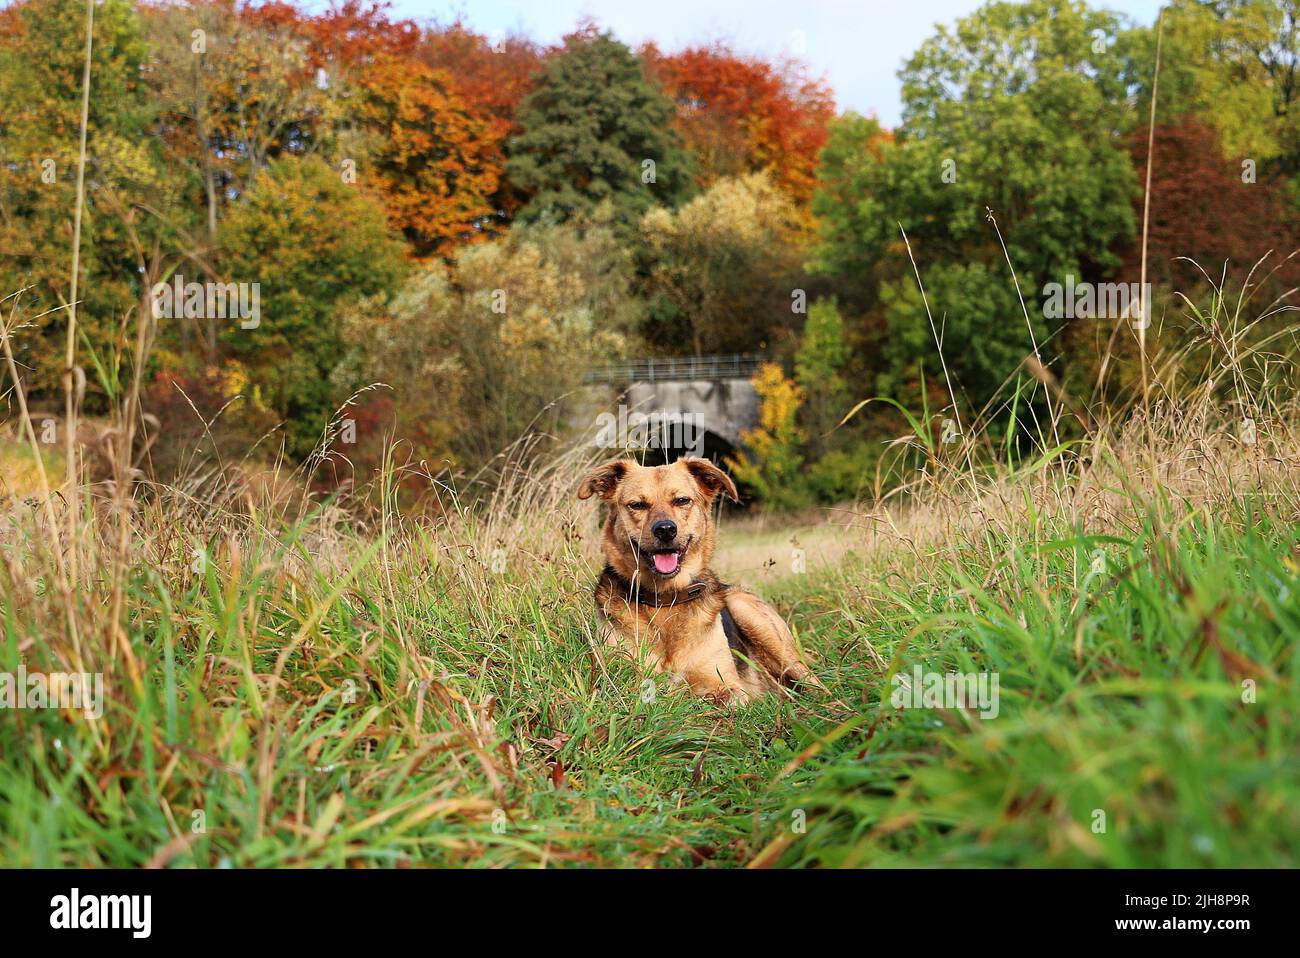 The Huntaway dog resting on the grass with trees in the background on an autumn day Stock Photo